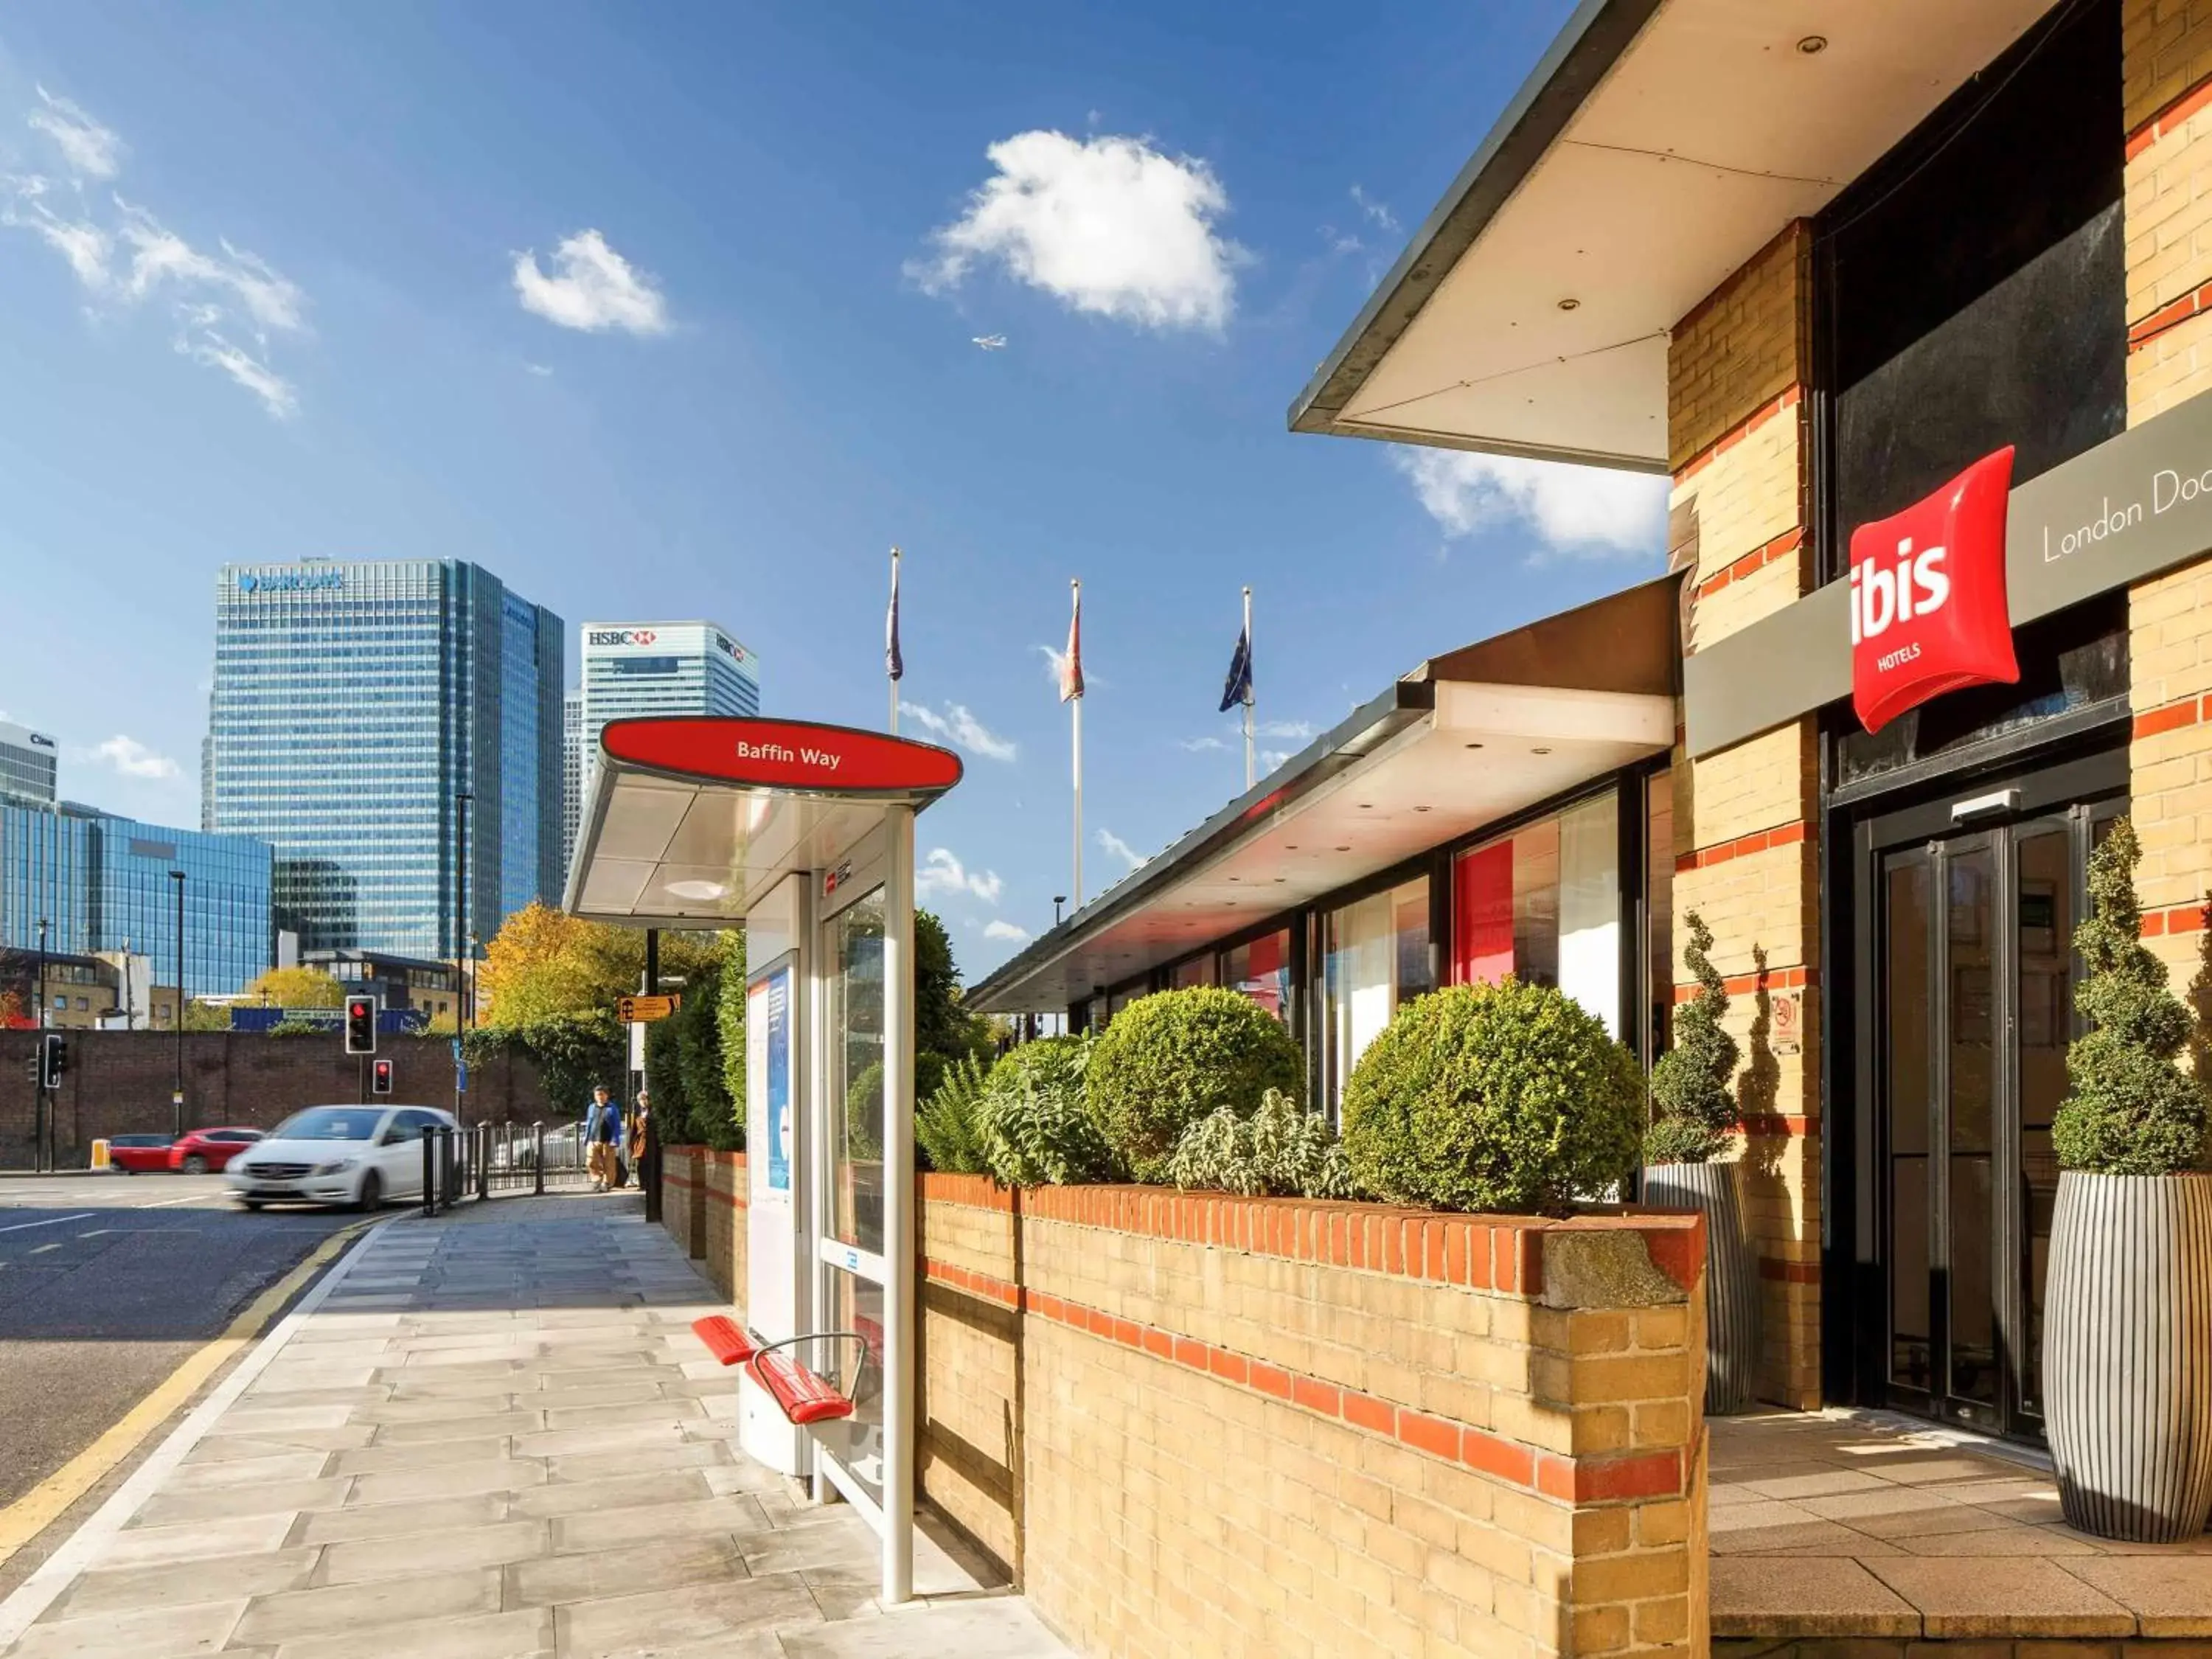 Property building in ibis London Docklands Canary Wharf